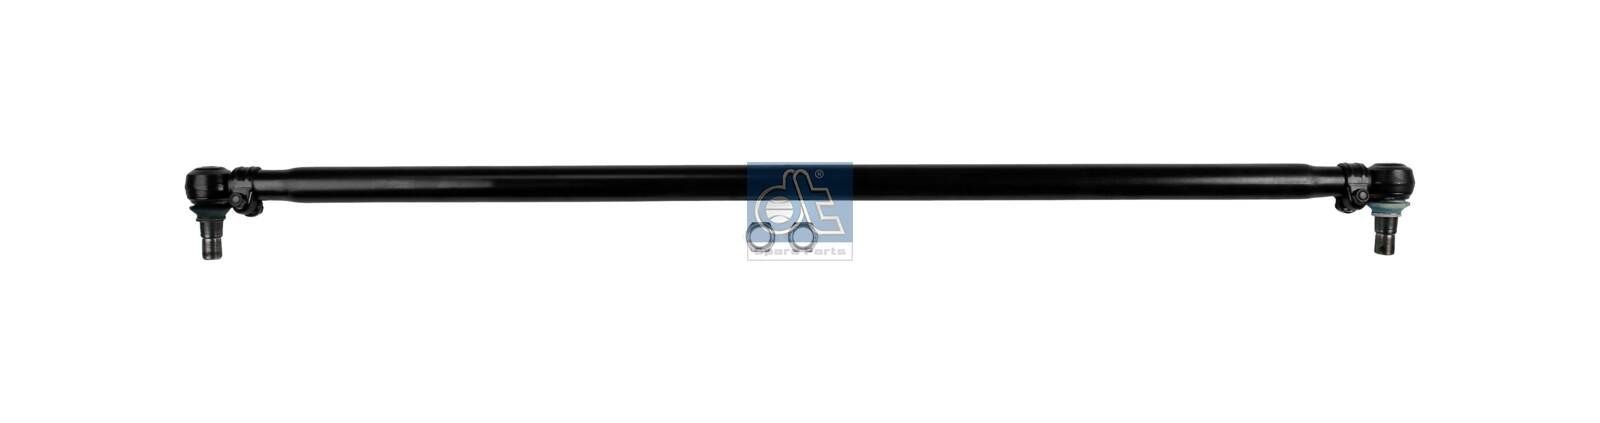 DT Spare Parts 4.62873 Rod Assembly 949 330 02 03